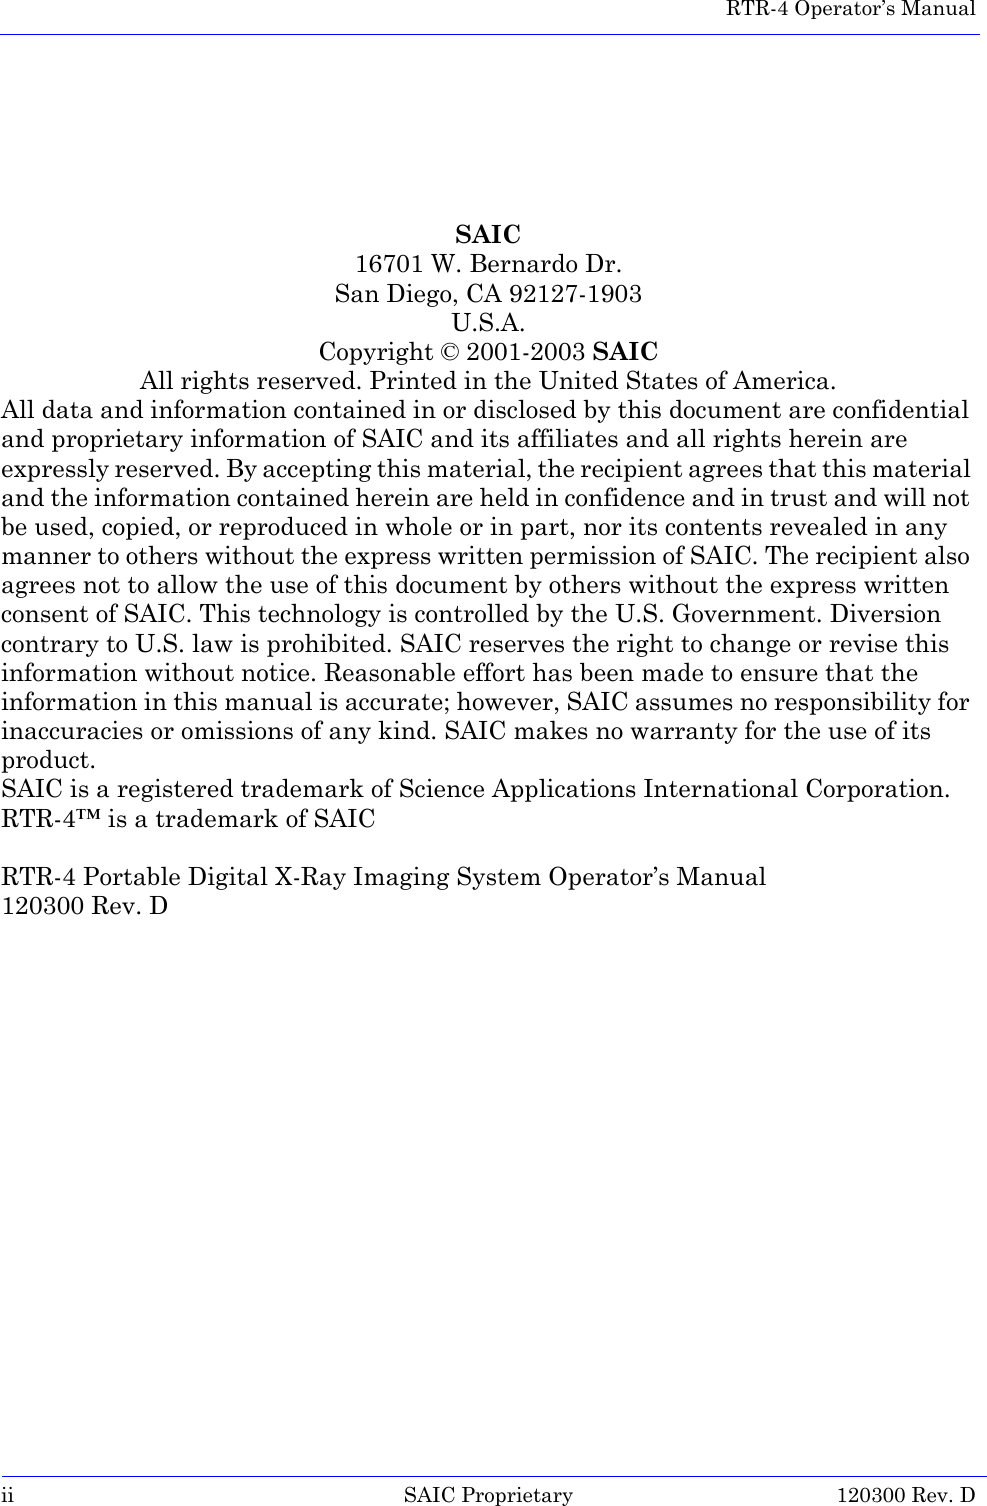  RTR-4 Operator’s Manualii SAIC Proprietary 120300 Rev. DSAIC16701 W. Bernardo Dr.San Diego, CA 92127-1903U.S.A.Copyright © 2001-2003 SAICAll rights reserved. Printed in the United States of America.All data and information contained in or disclosed by this document are confidential and proprietary information of SAIC and its affiliates and all rights herein are expressly reserved. By accepting this material, the recipient agrees that this material and the information contained herein are held in confidence and in trust and will not be used, copied, or reproduced in whole or in part, nor its contents revealed in any manner to others without the express written permission of SAIC. The recipient also agrees not to allow the use of this document by others without the express written consent of SAIC. This technology is controlled by the U.S. Government. Diversion contrary to U.S. law is prohibited. SAIC reserves the right to change or revise this information without notice. Reasonable effort has been made to ensure that the information in this manual is accurate; however, SAIC assumes no responsibility for inaccuracies or omissions of any kind. SAIC makes no warranty for the use of its product.SAIC is a registered trademark of Science Applications International Corporation.RTR-4™ is a trademark of SAICRTR-4 Portable Digital X-Ray Imaging System Operator’s Manual120300 Rev. D